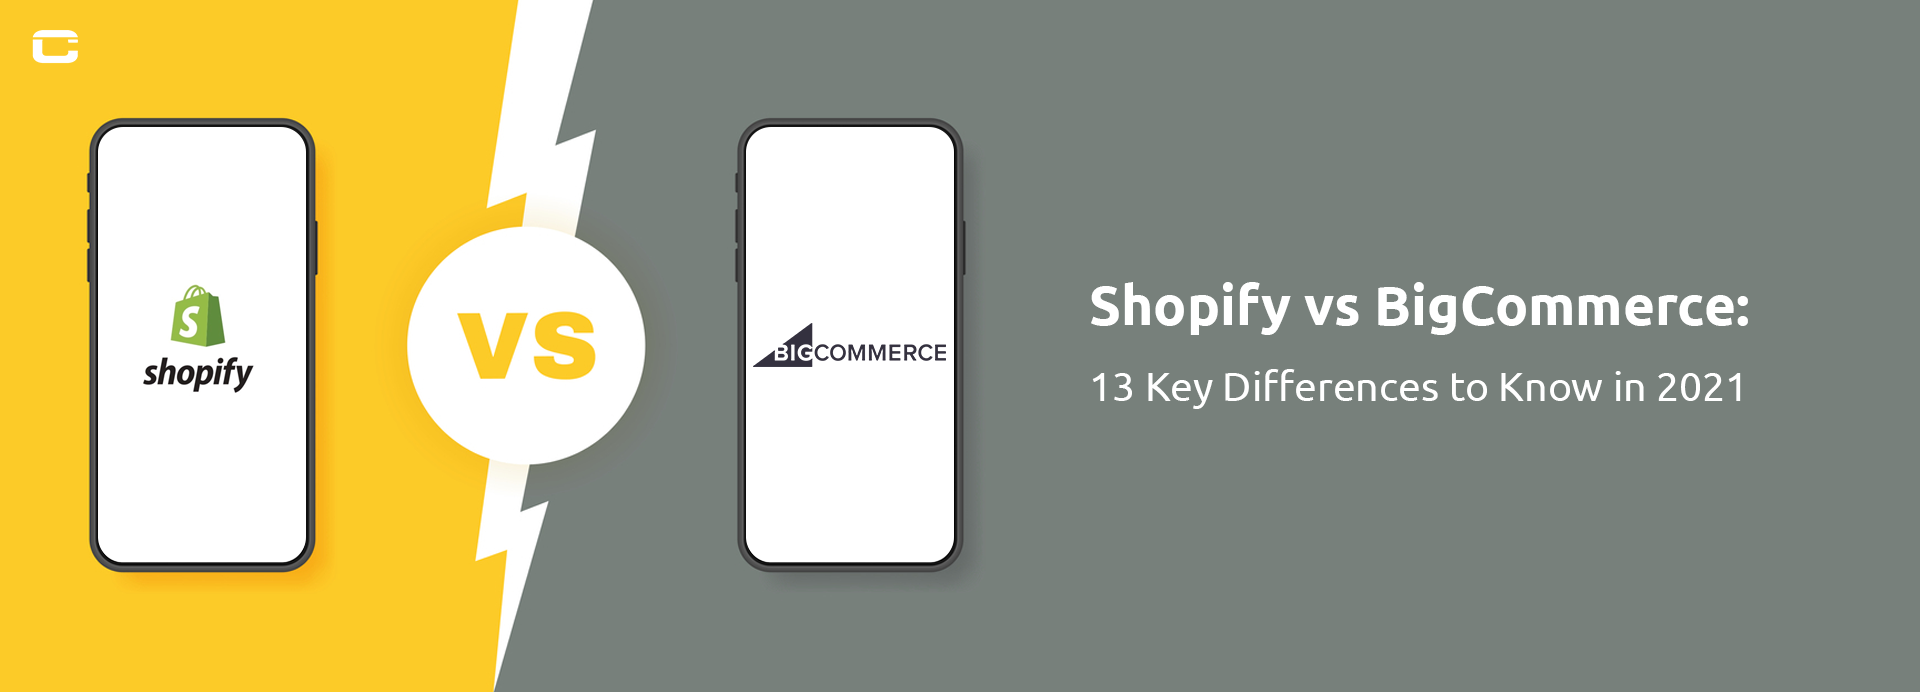 Shopify vs BigCommerce: 13 Key Differences to Know in 2021